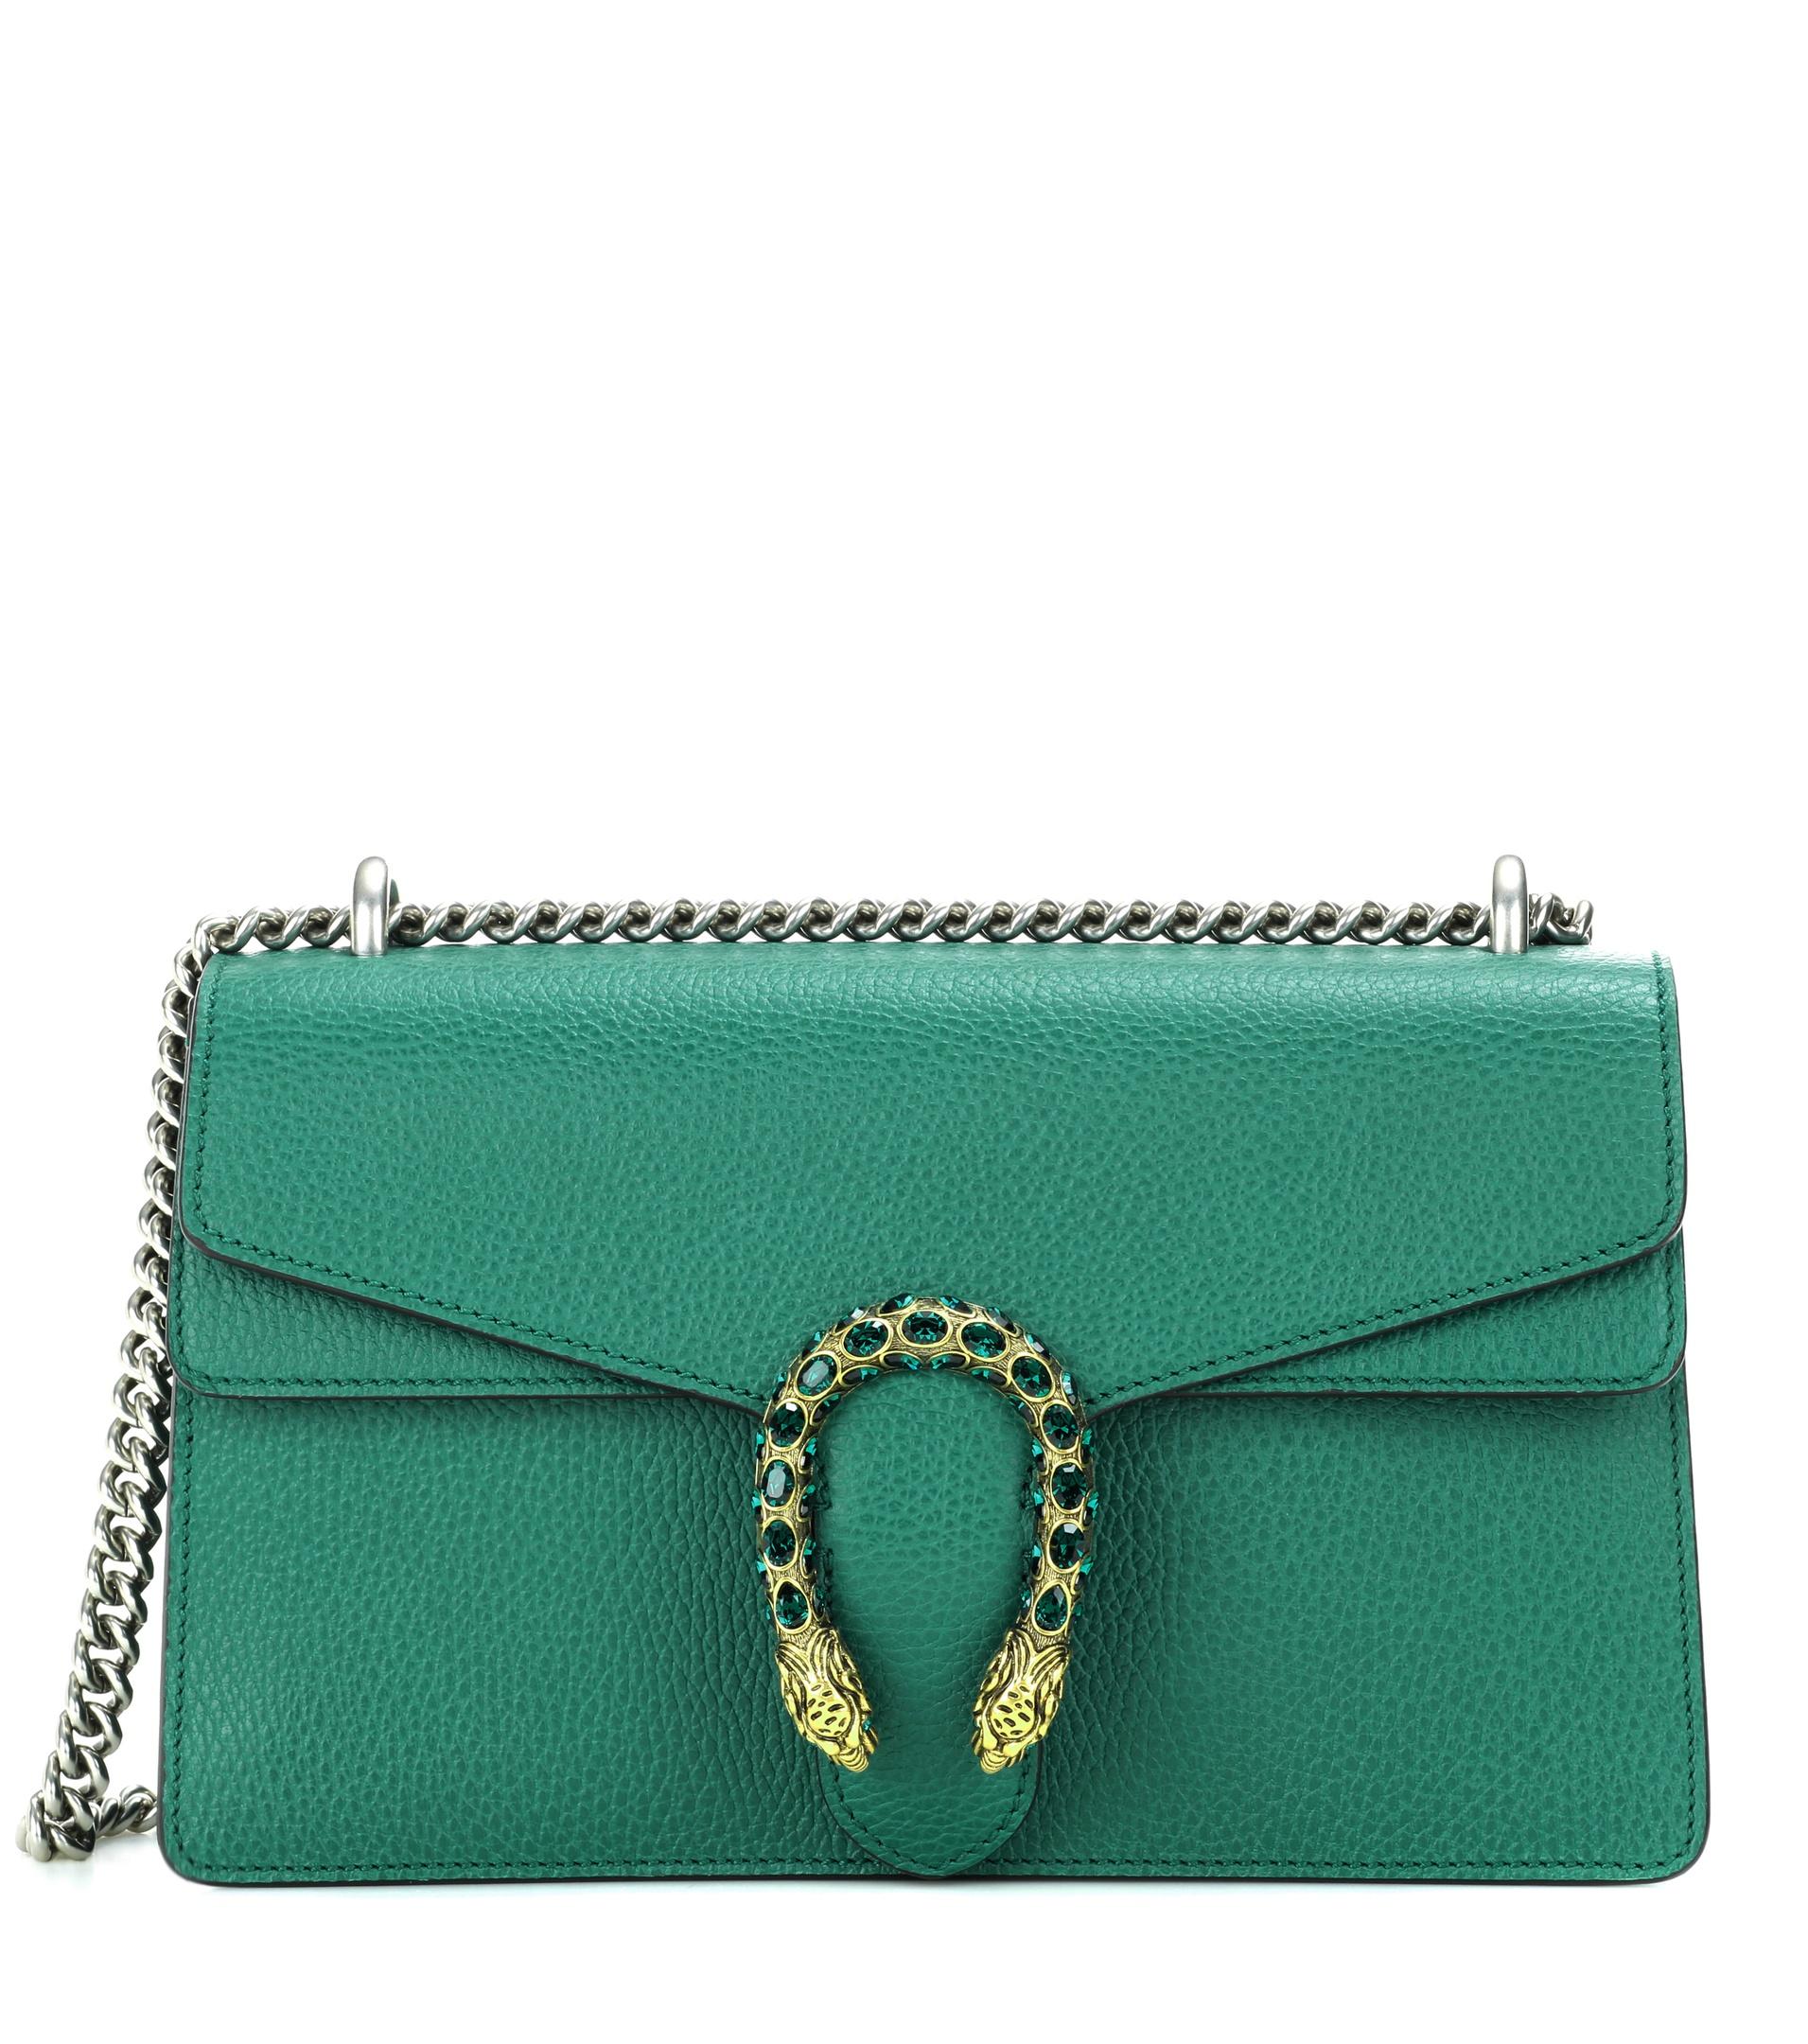 Gucci Dionysus Small Leather Shoulder Bag in | Lyst